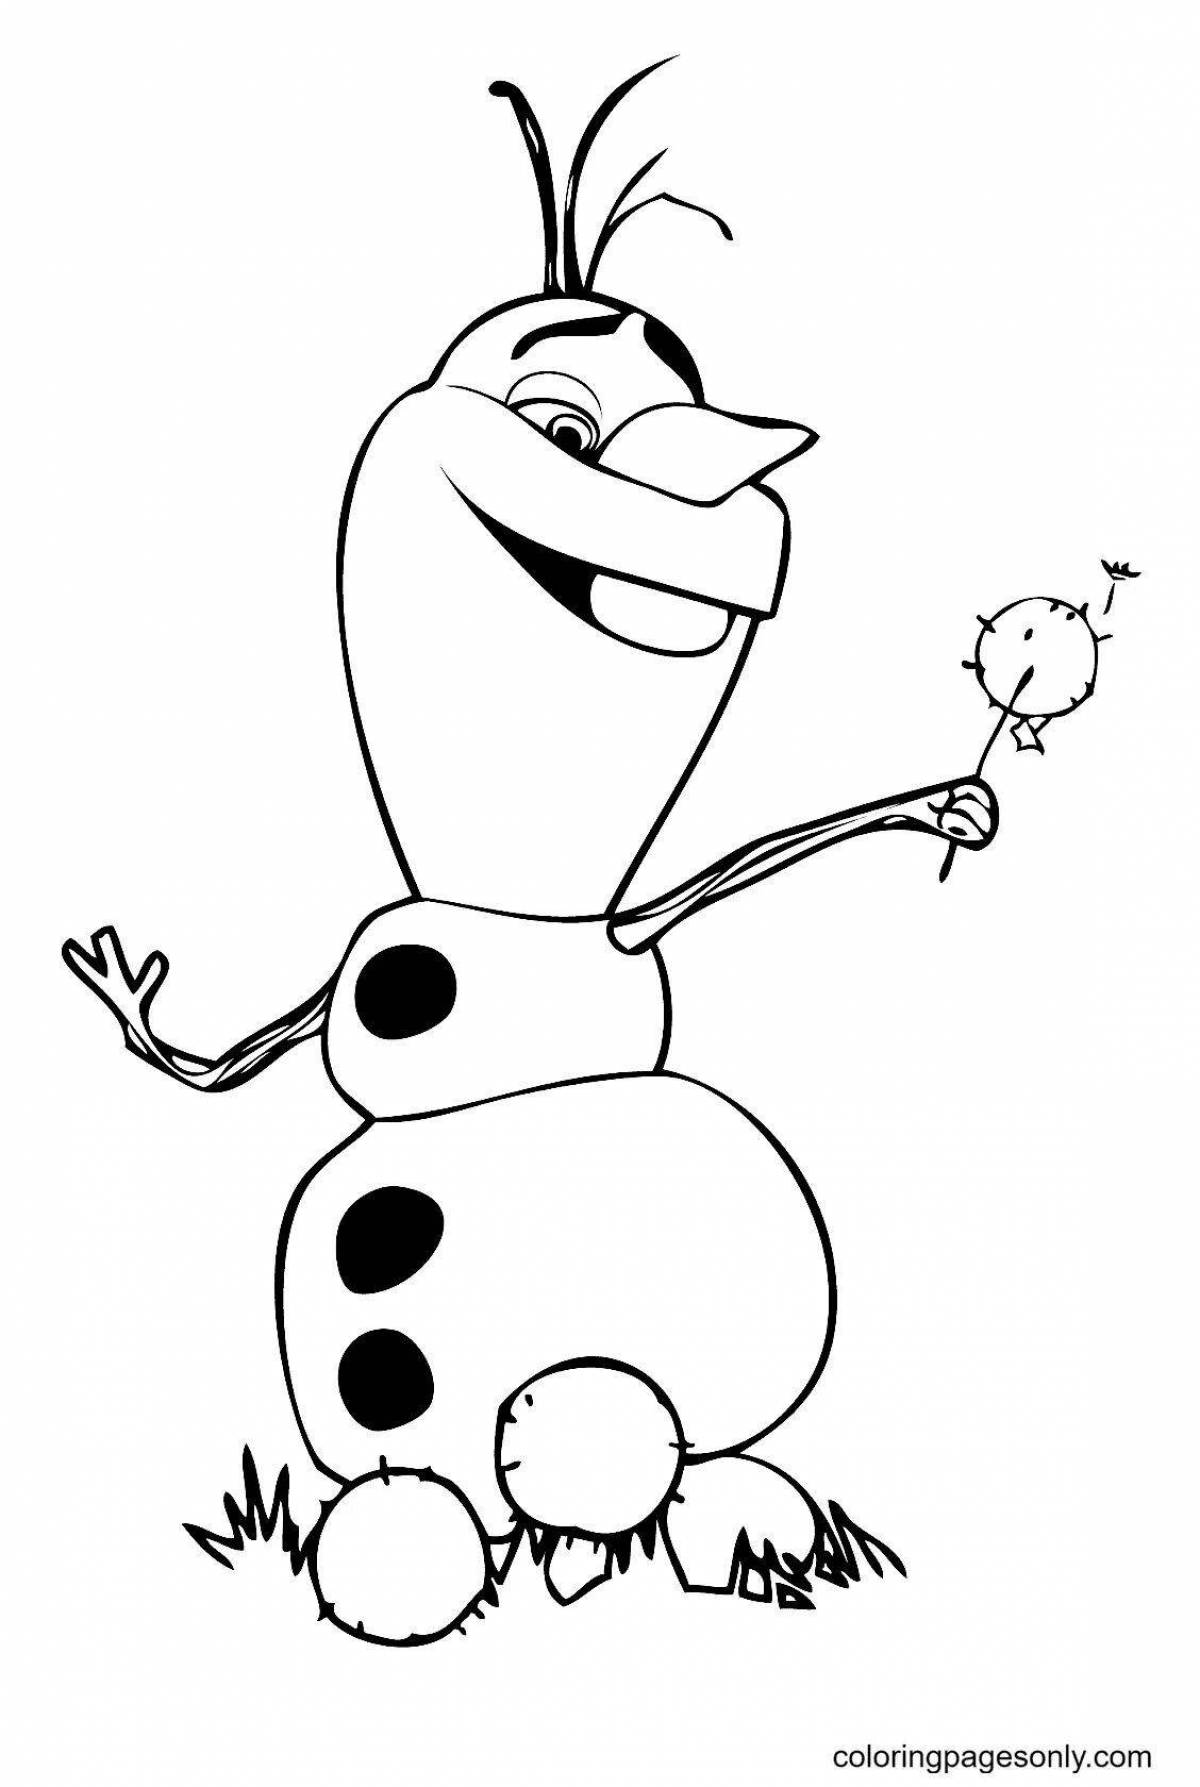 Olaf's cold heart biting coloring book